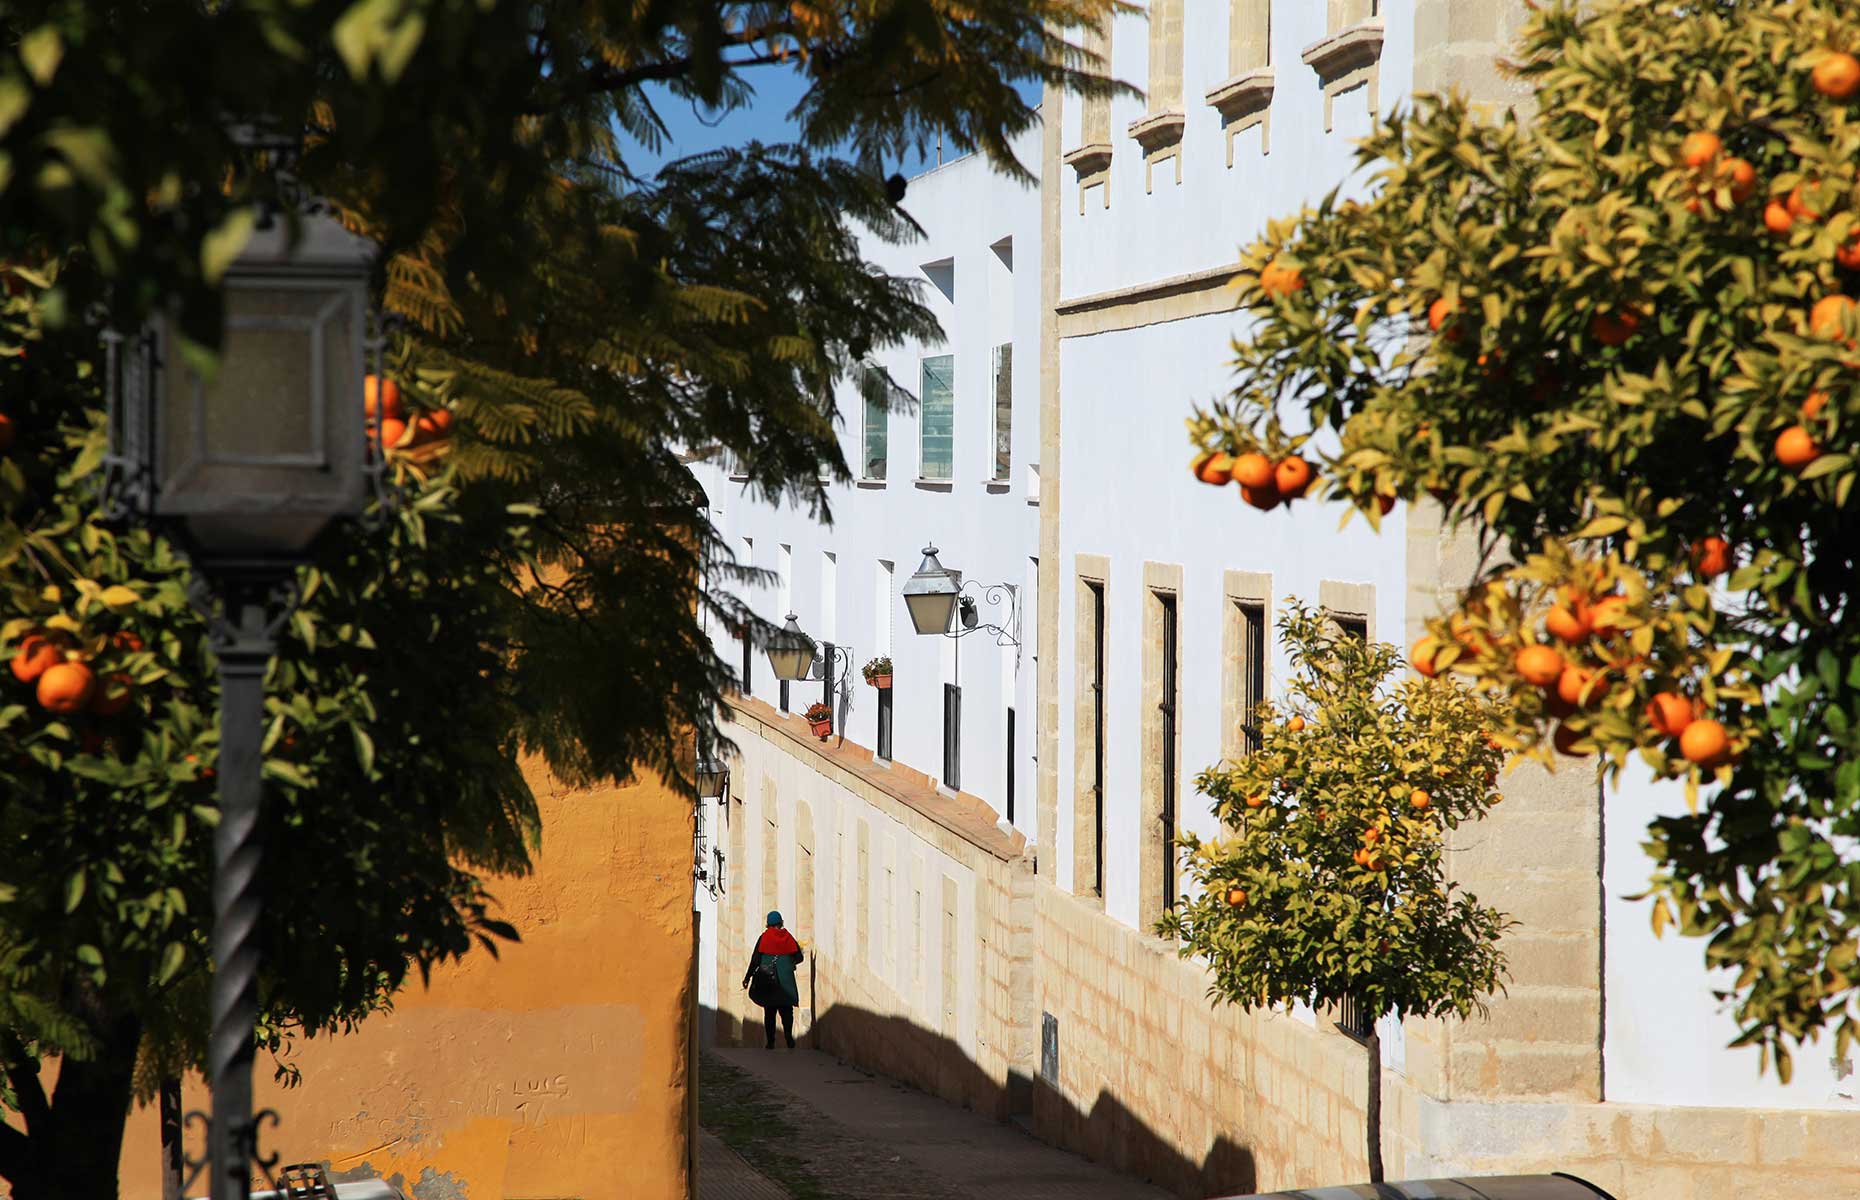 The streets of Jerez in February, complete with orange trees